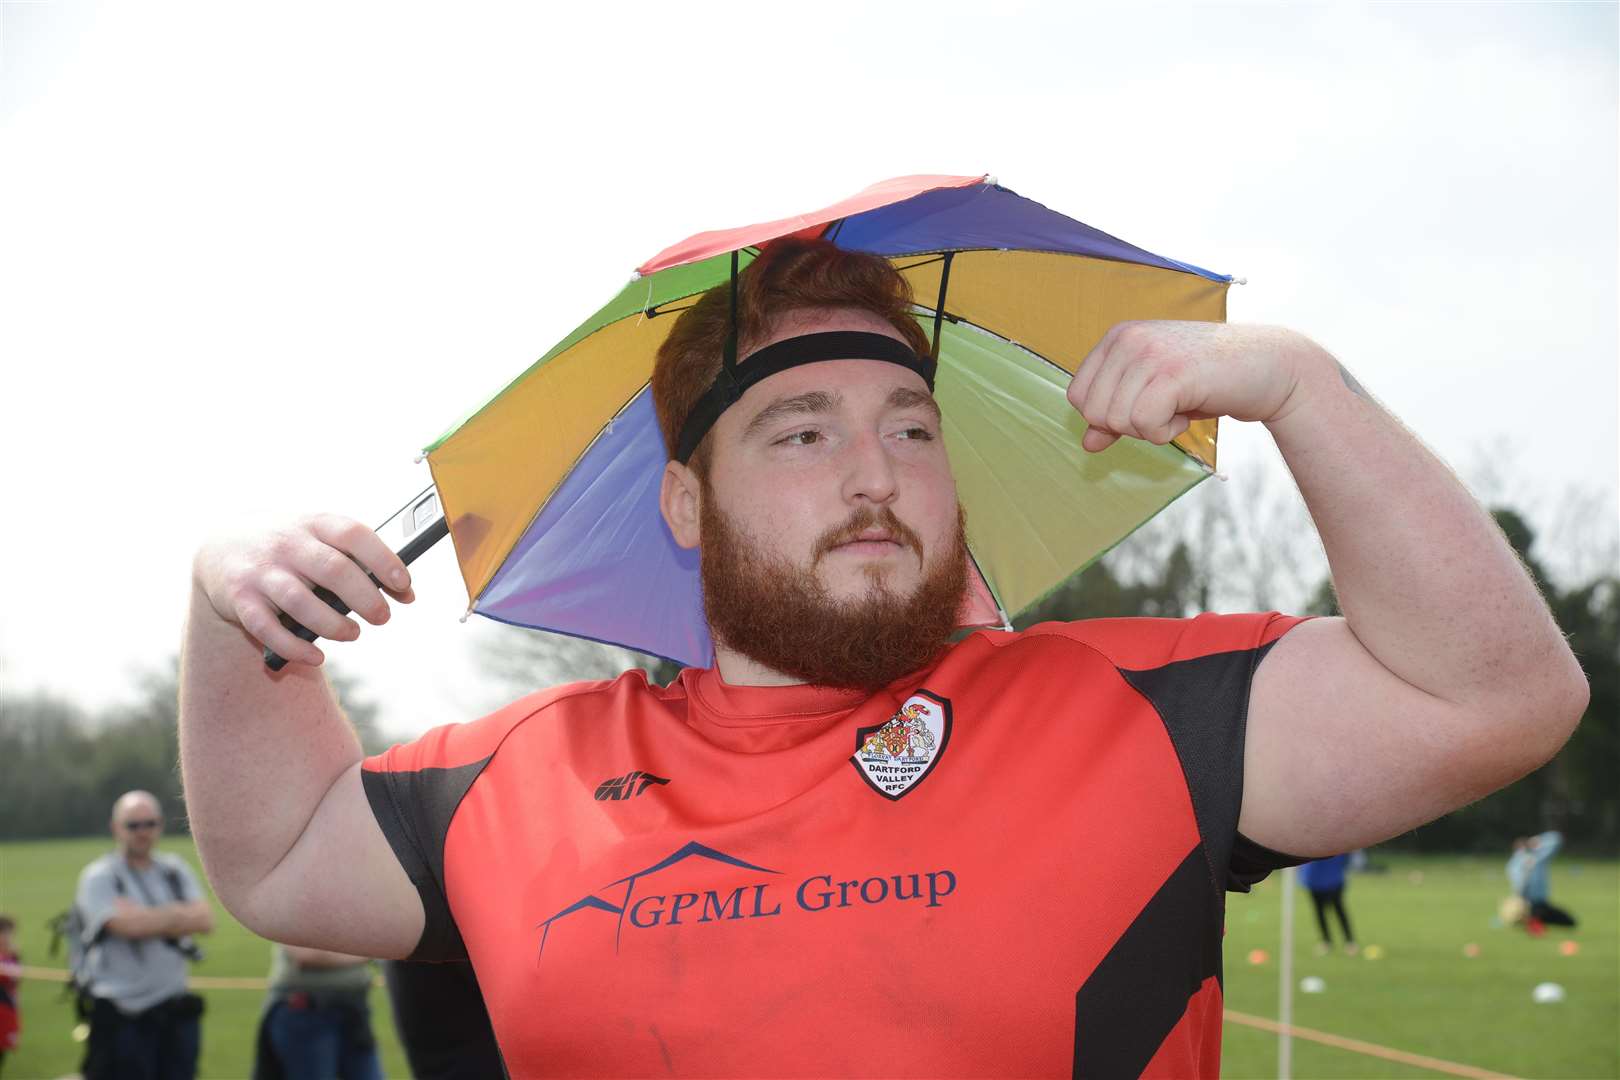 The community day was attended by all age groups, pictured is 1st XV player Danny Clive. Picture: Gary Browne (1494906)